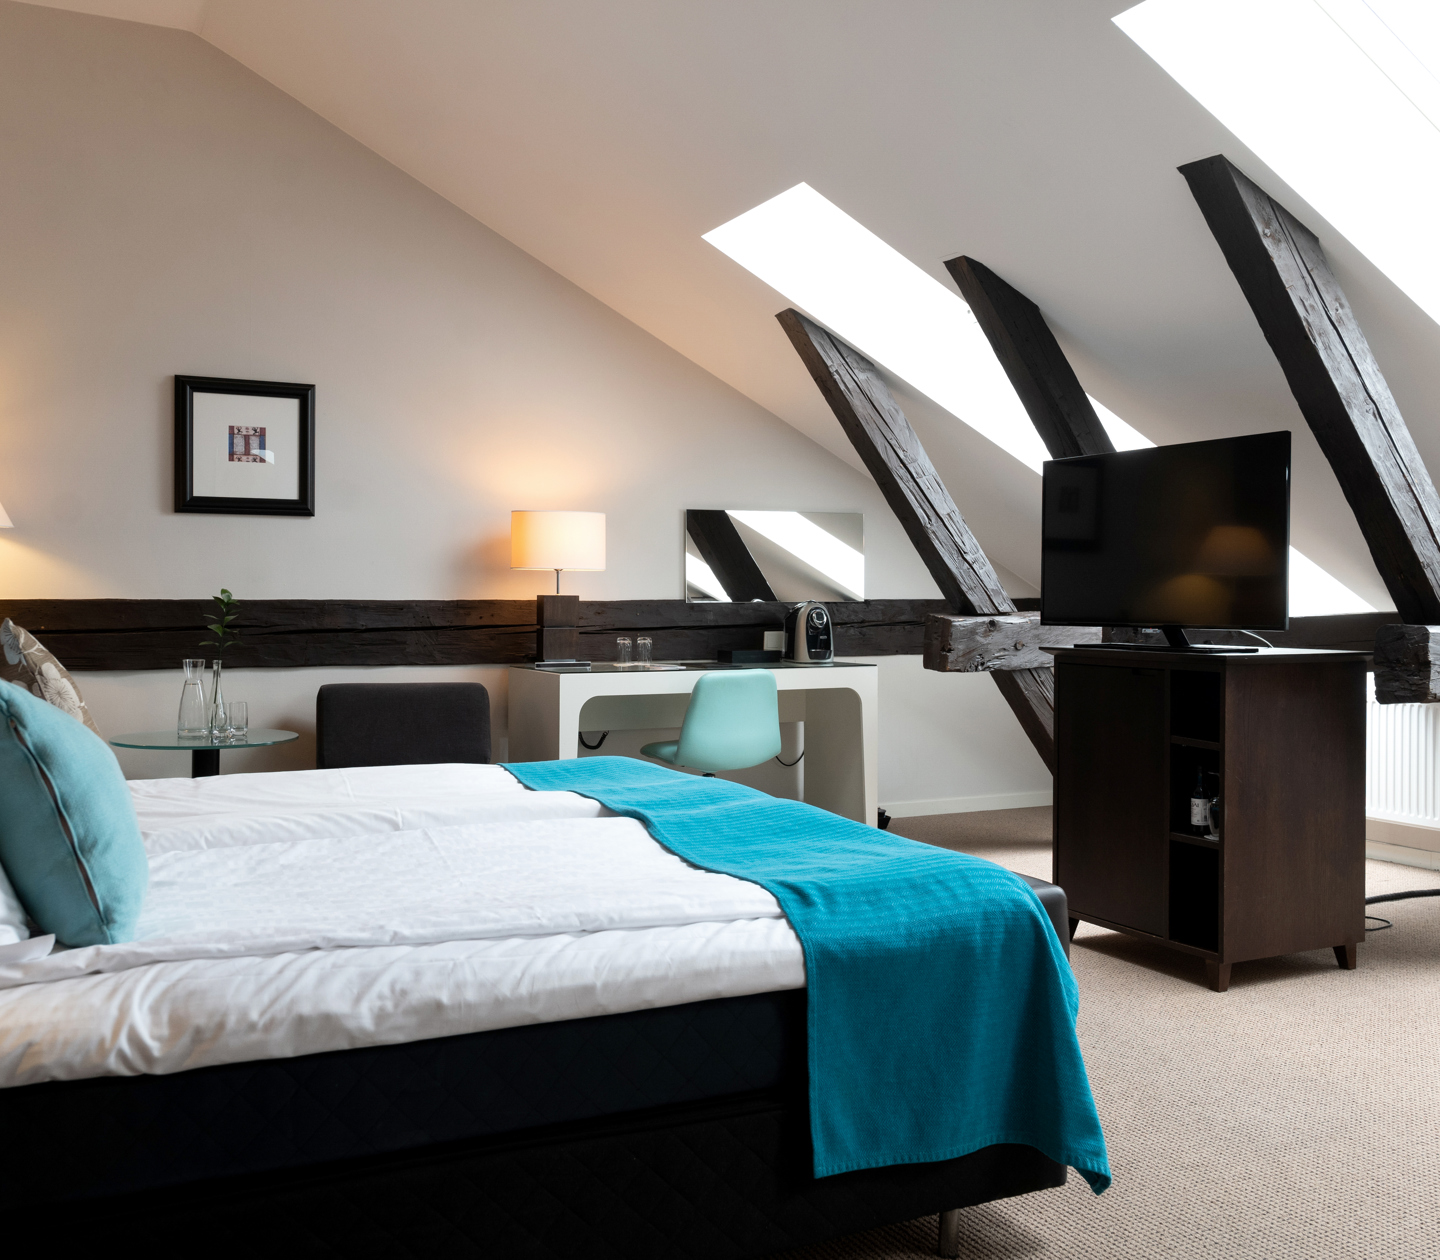 Hotel room with sloping ceilings and black wooden beams